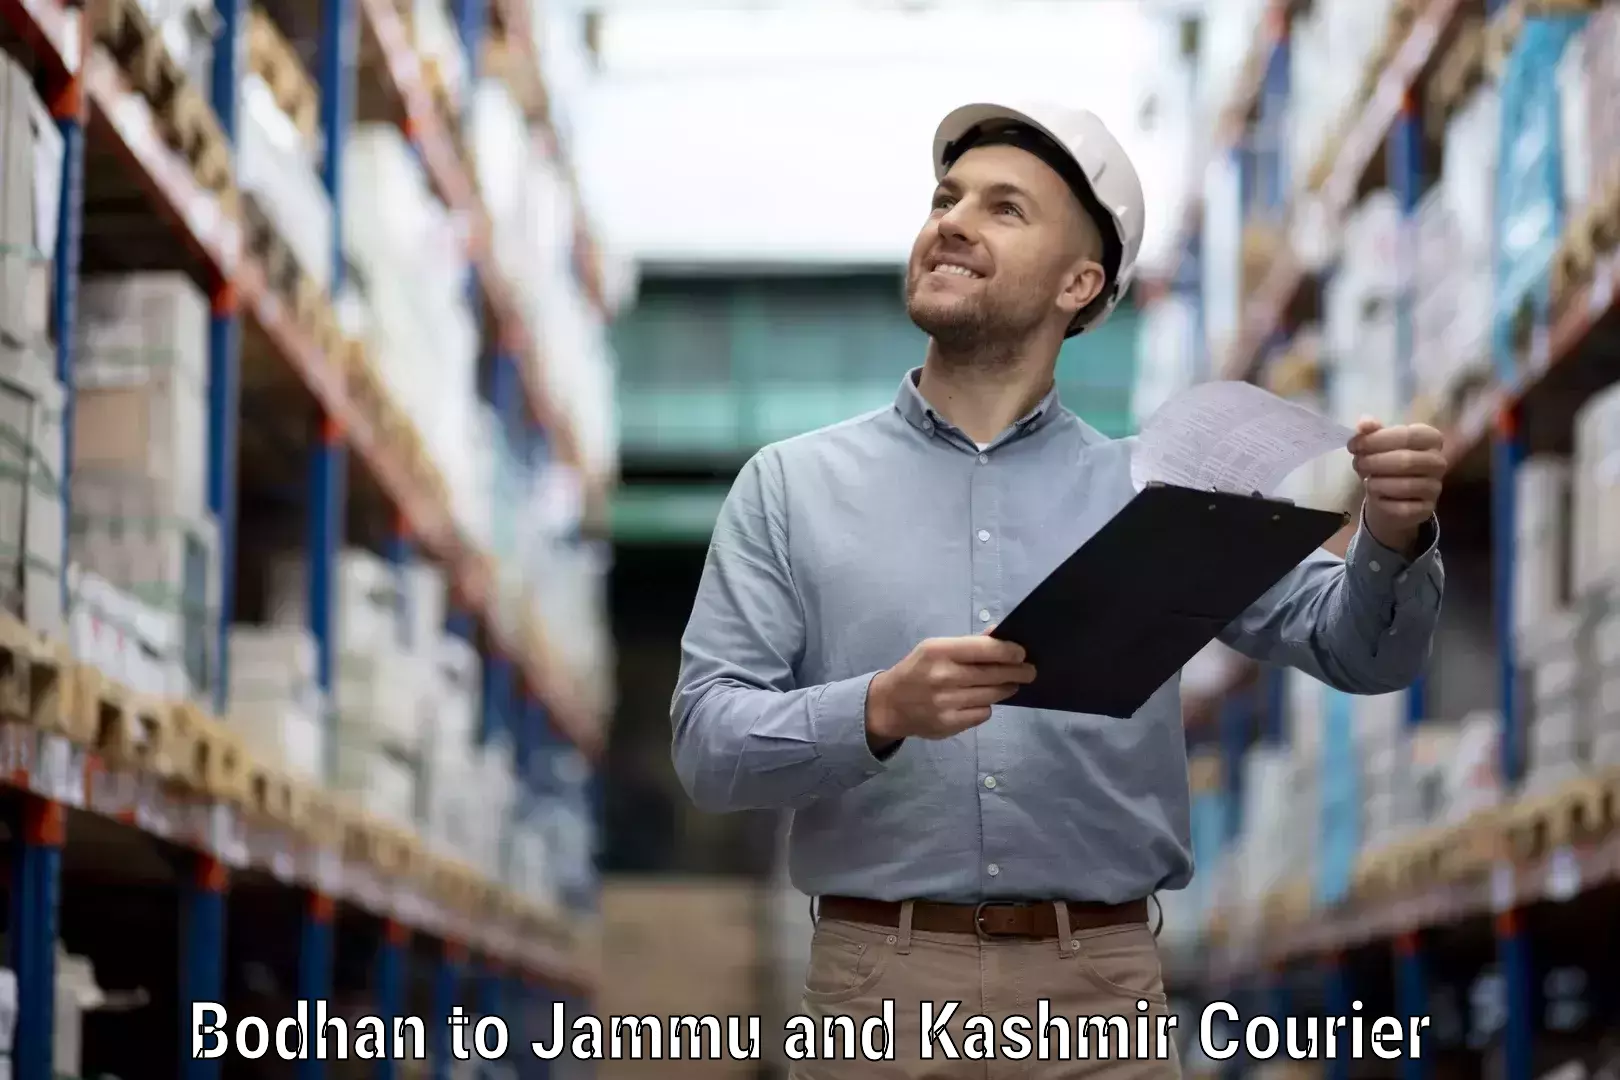 24-hour courier service Bodhan to Jammu and Kashmir